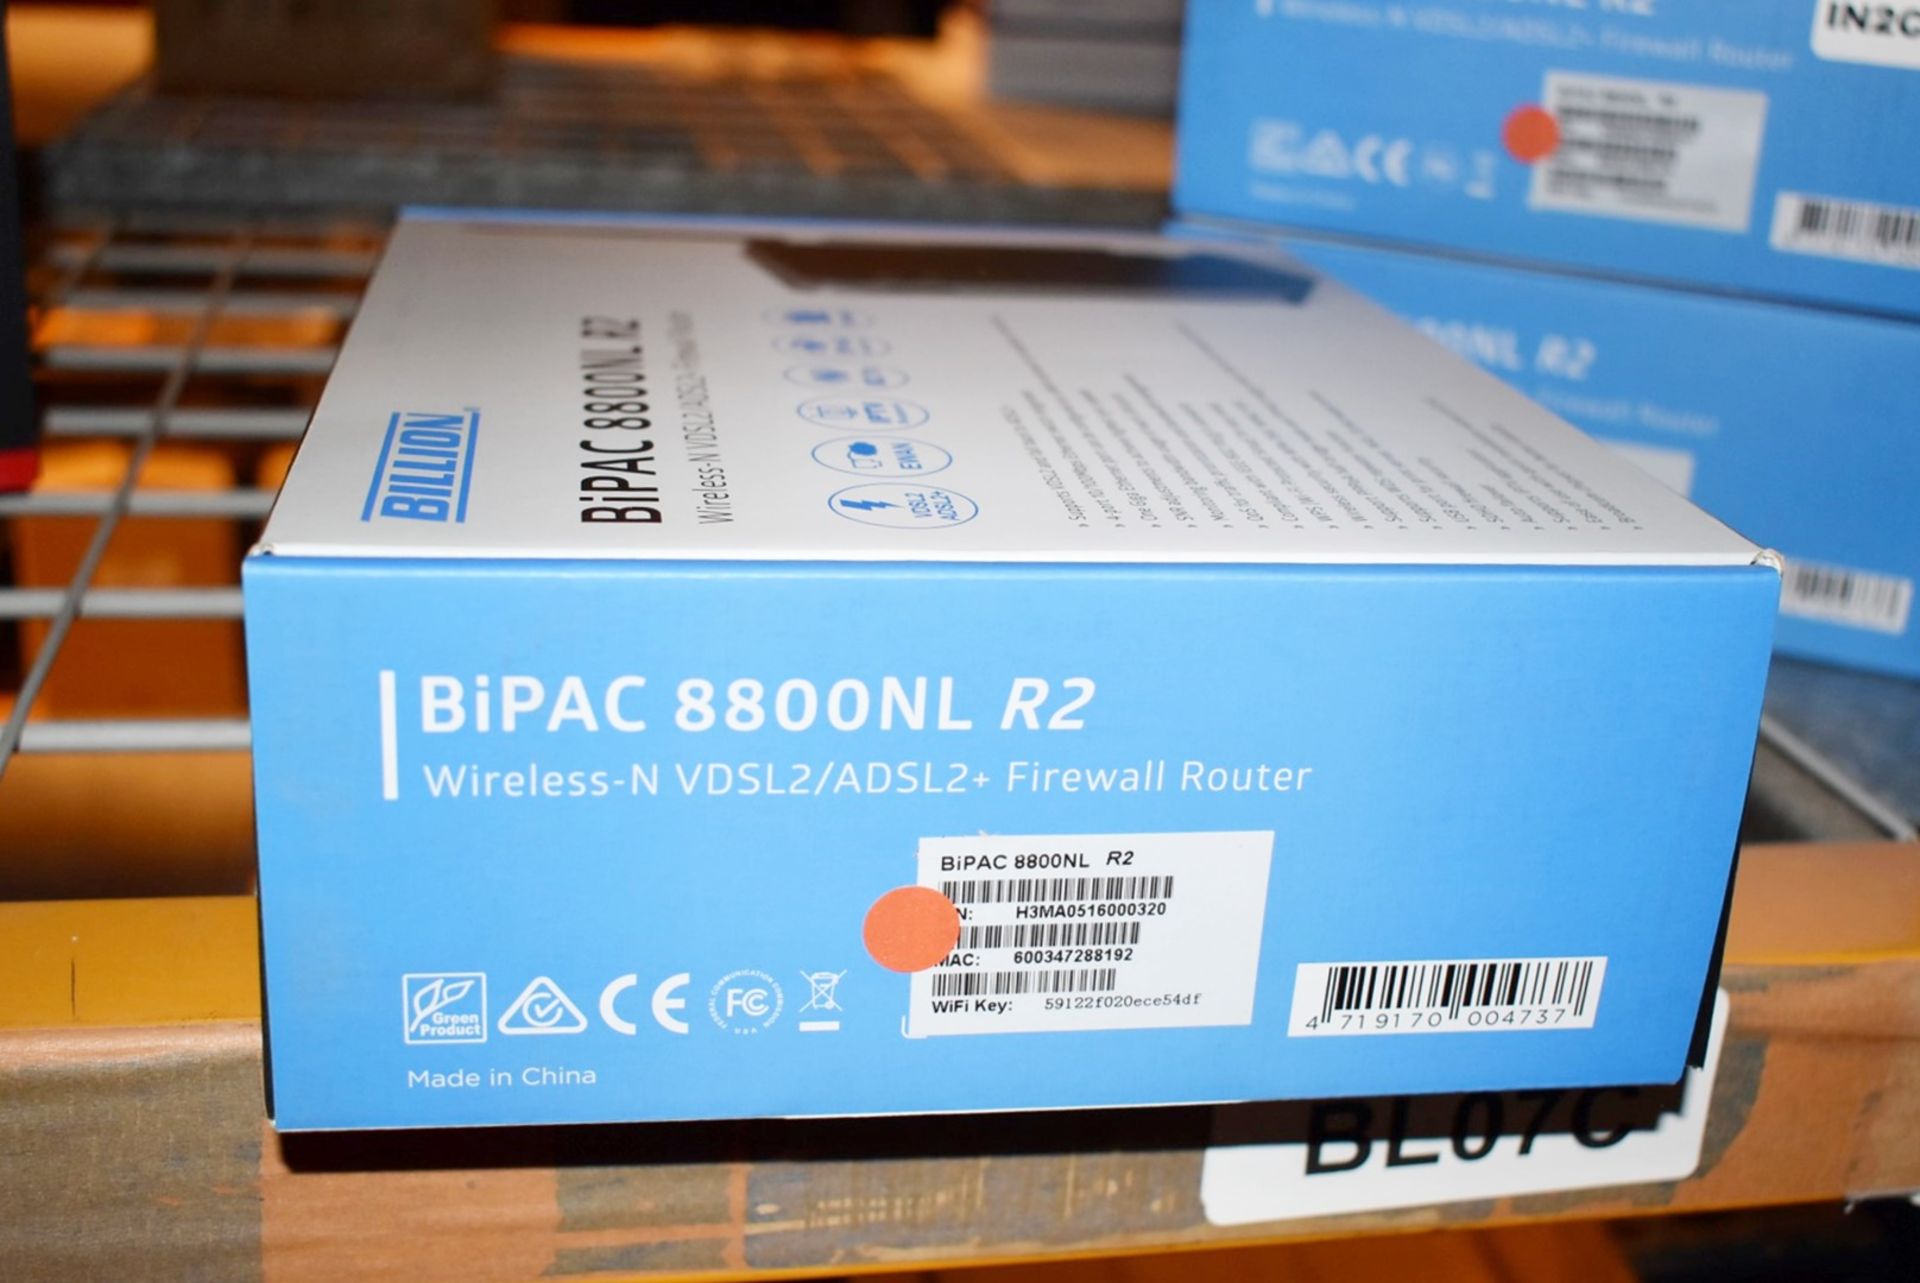 1 x Billion BiPAC 8800NL R2 VDSL2/ADSL2+ Firewall Router - New Boxed Stock - RRP £84 - Image 2 of 3